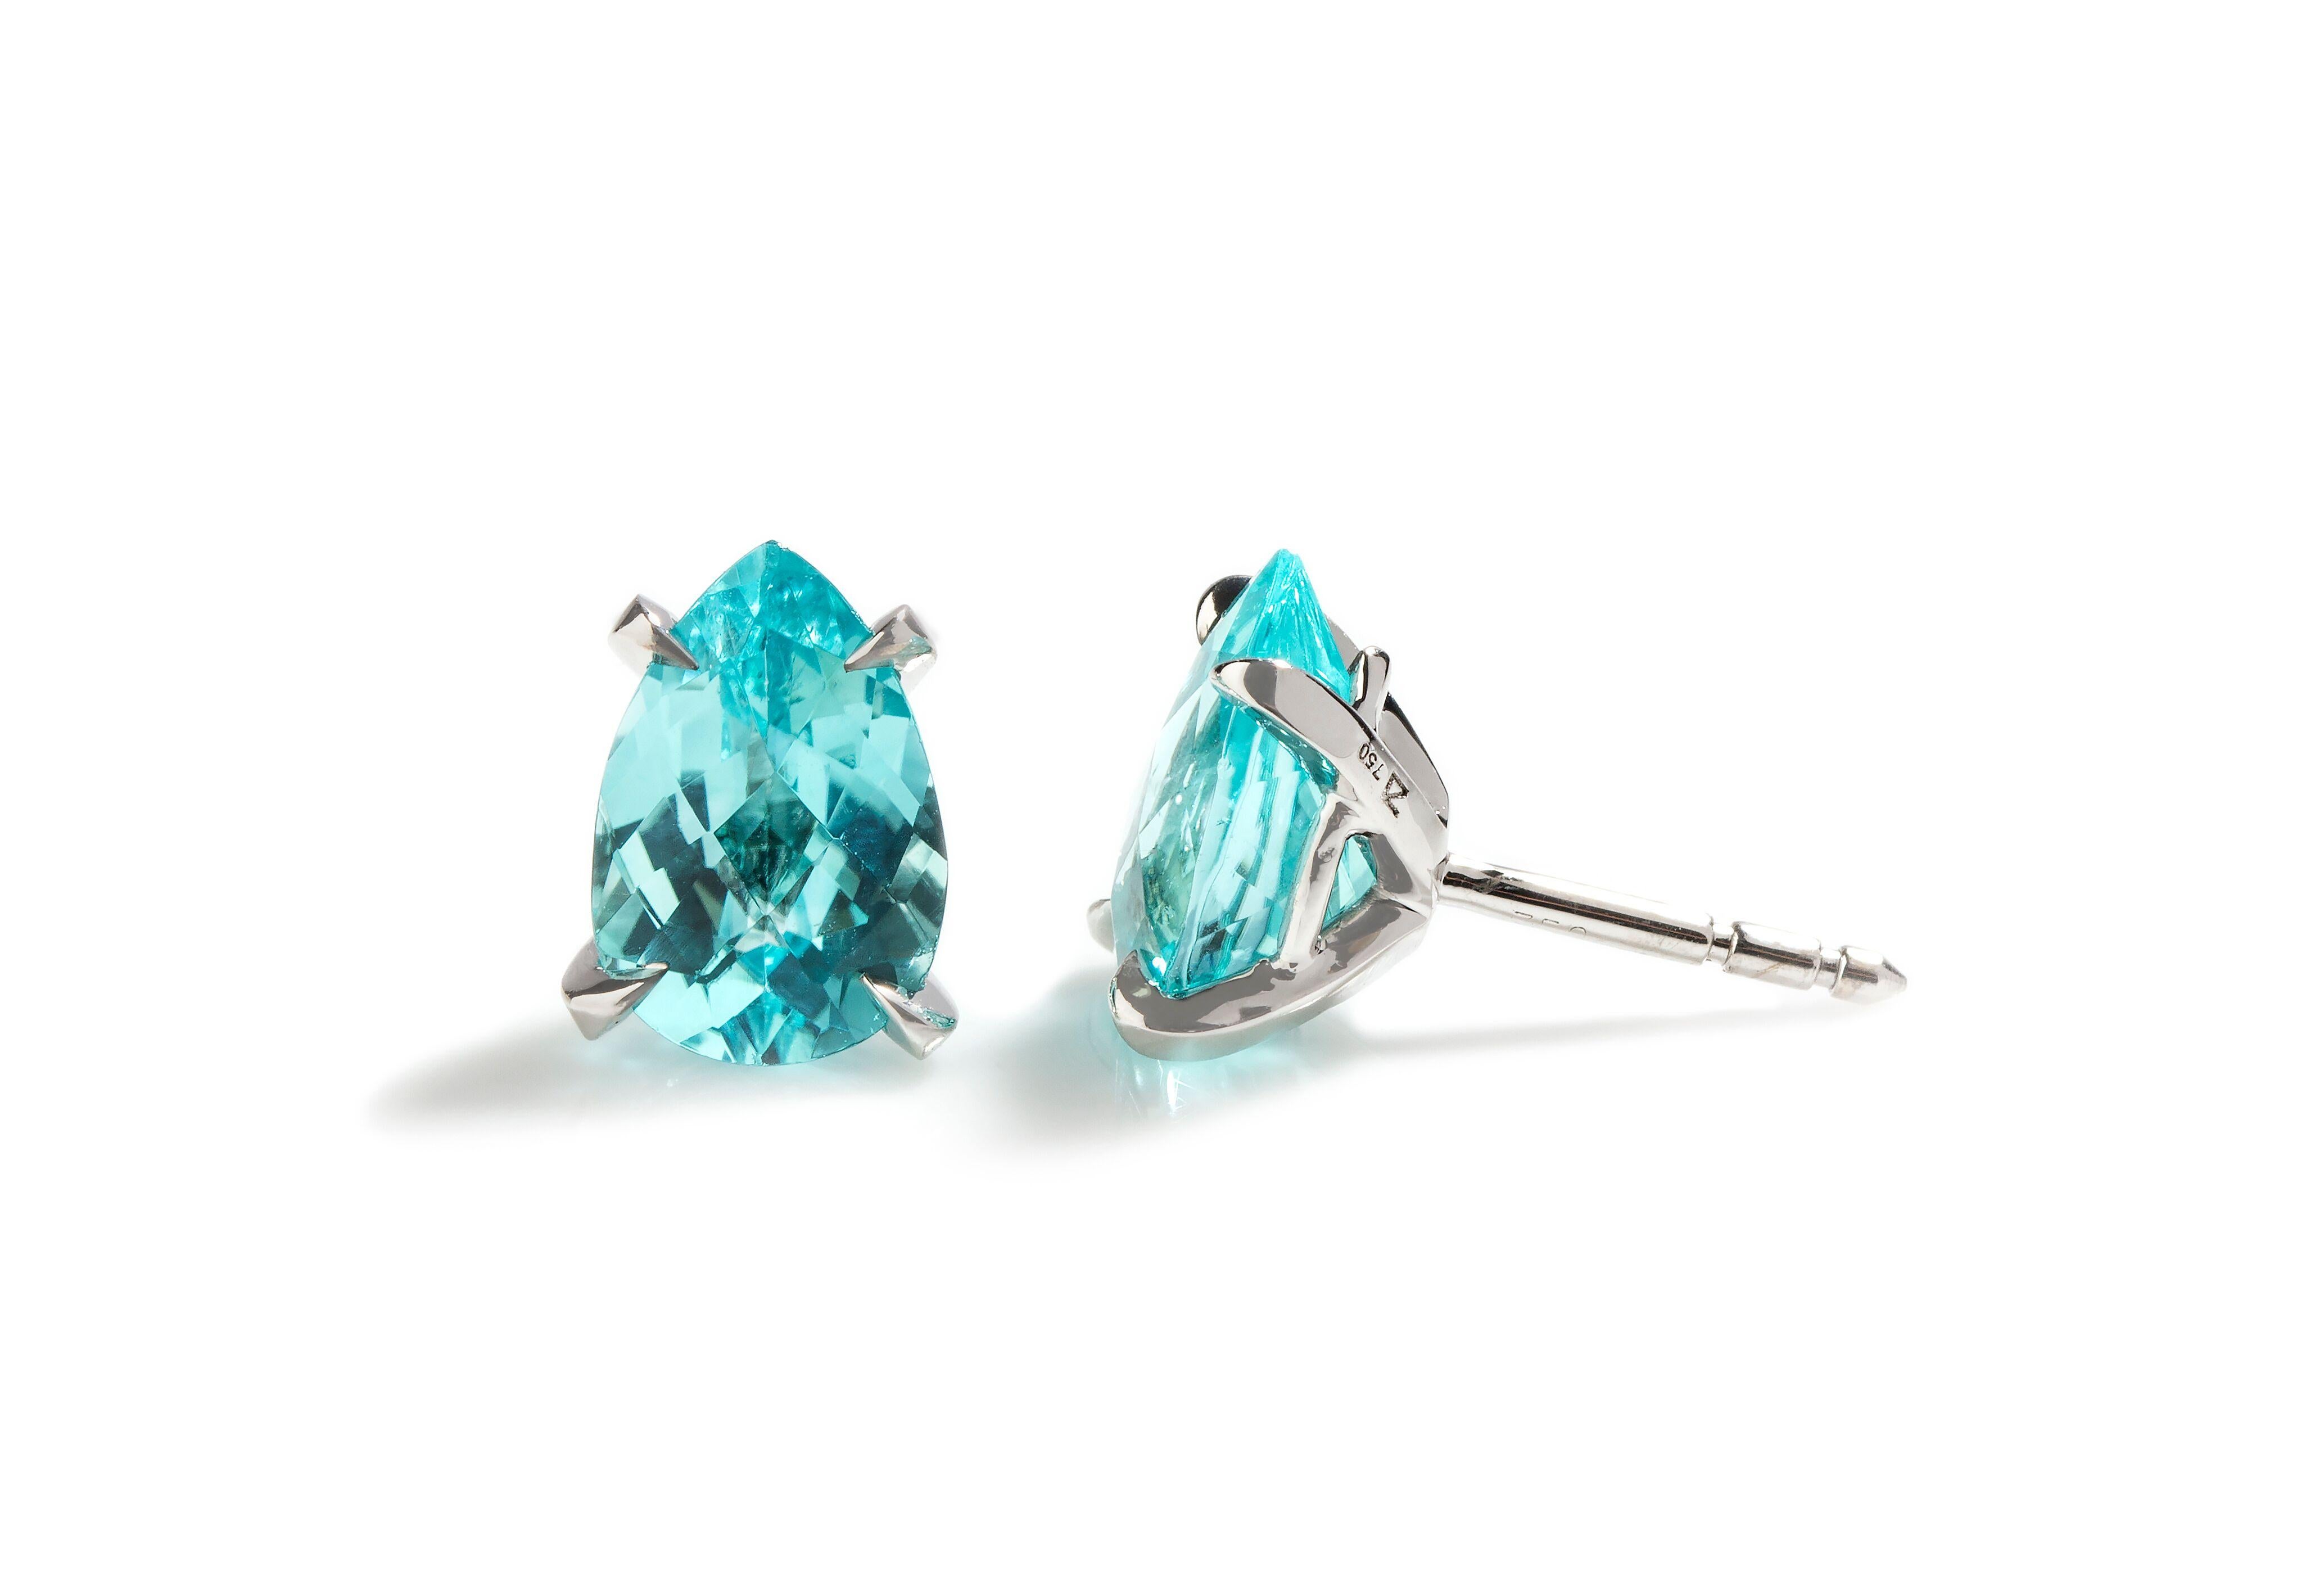 18K White Gold Earrings Paraiba Tourmaline (3.54ct) 
Ref: EB06-319
Beautiful, Signature Paraiba Tourmaline stud Earrings
*If you require any bespoke changes (different type of metal/gemstones/cut/sizing) or you would like to see the whole collection